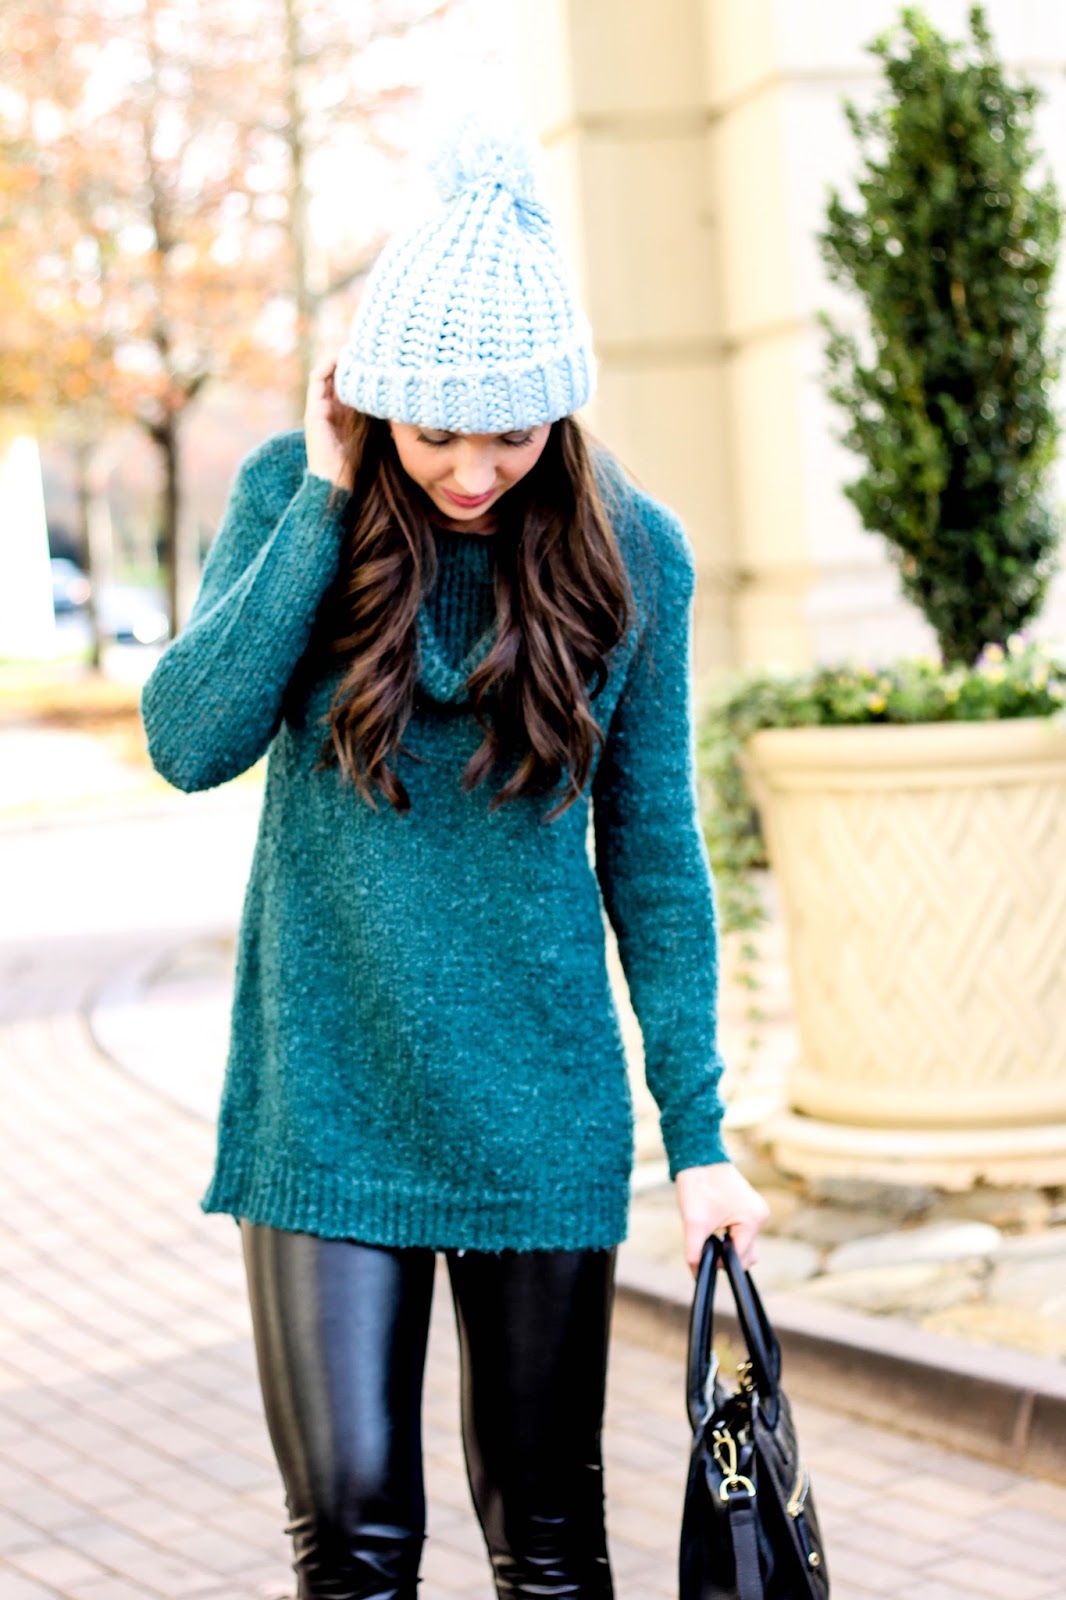 Cozy Sweater + Faux Leather Leggings - Pretty in the Pines, New York City  Lifestyle Blog